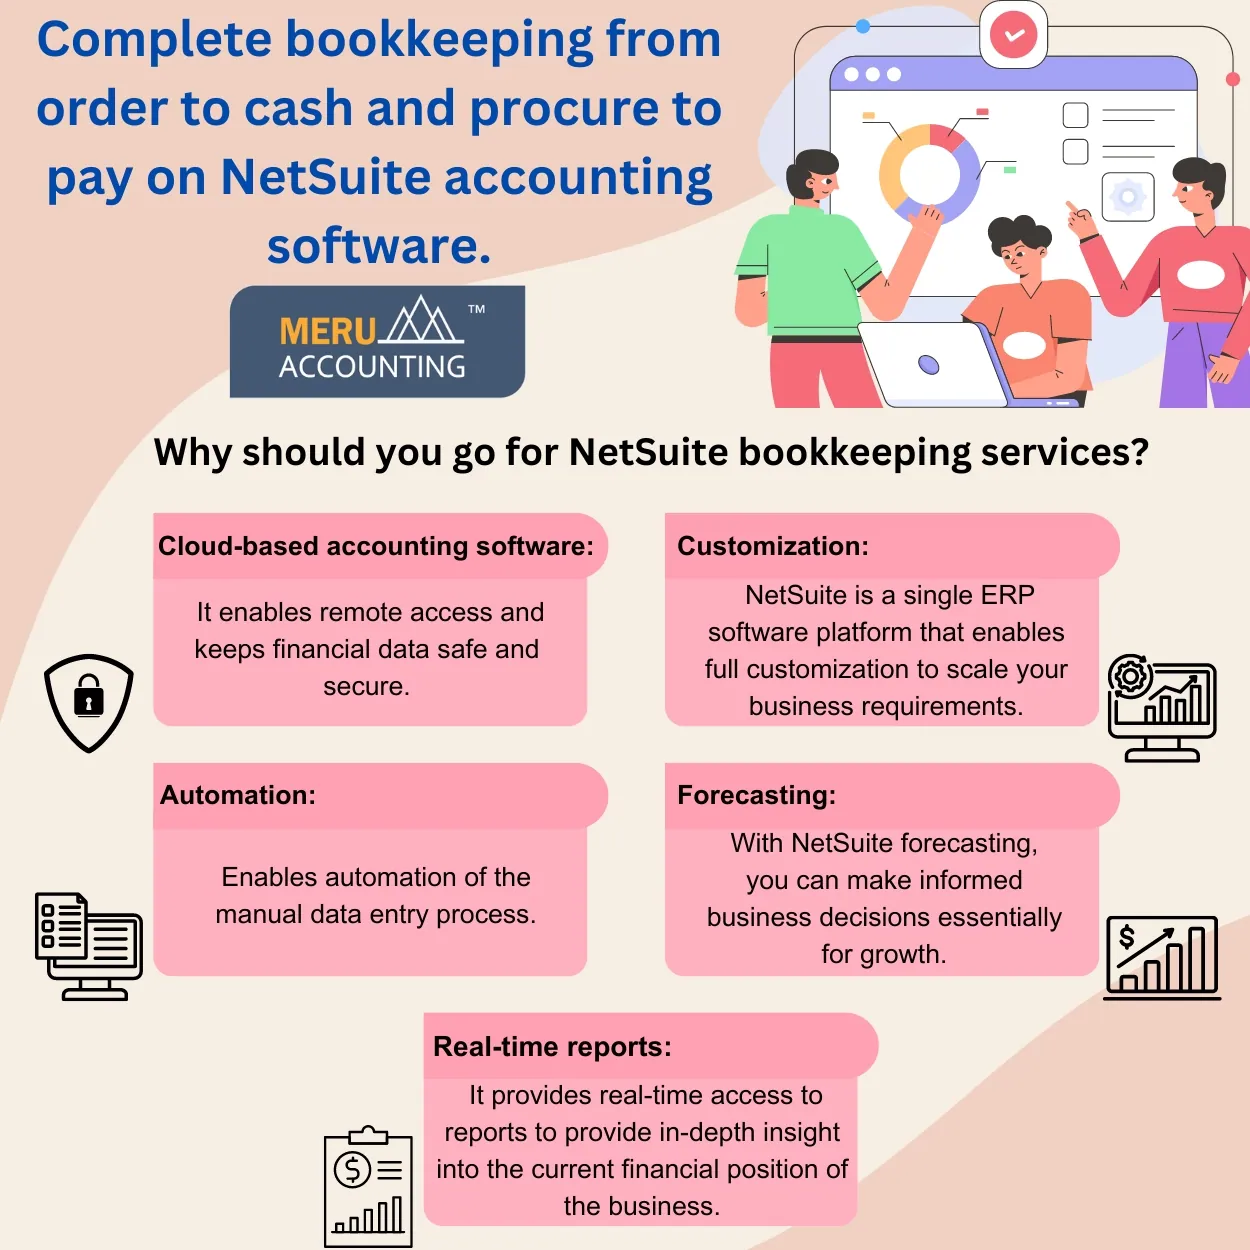 netsuite bookkeeping services